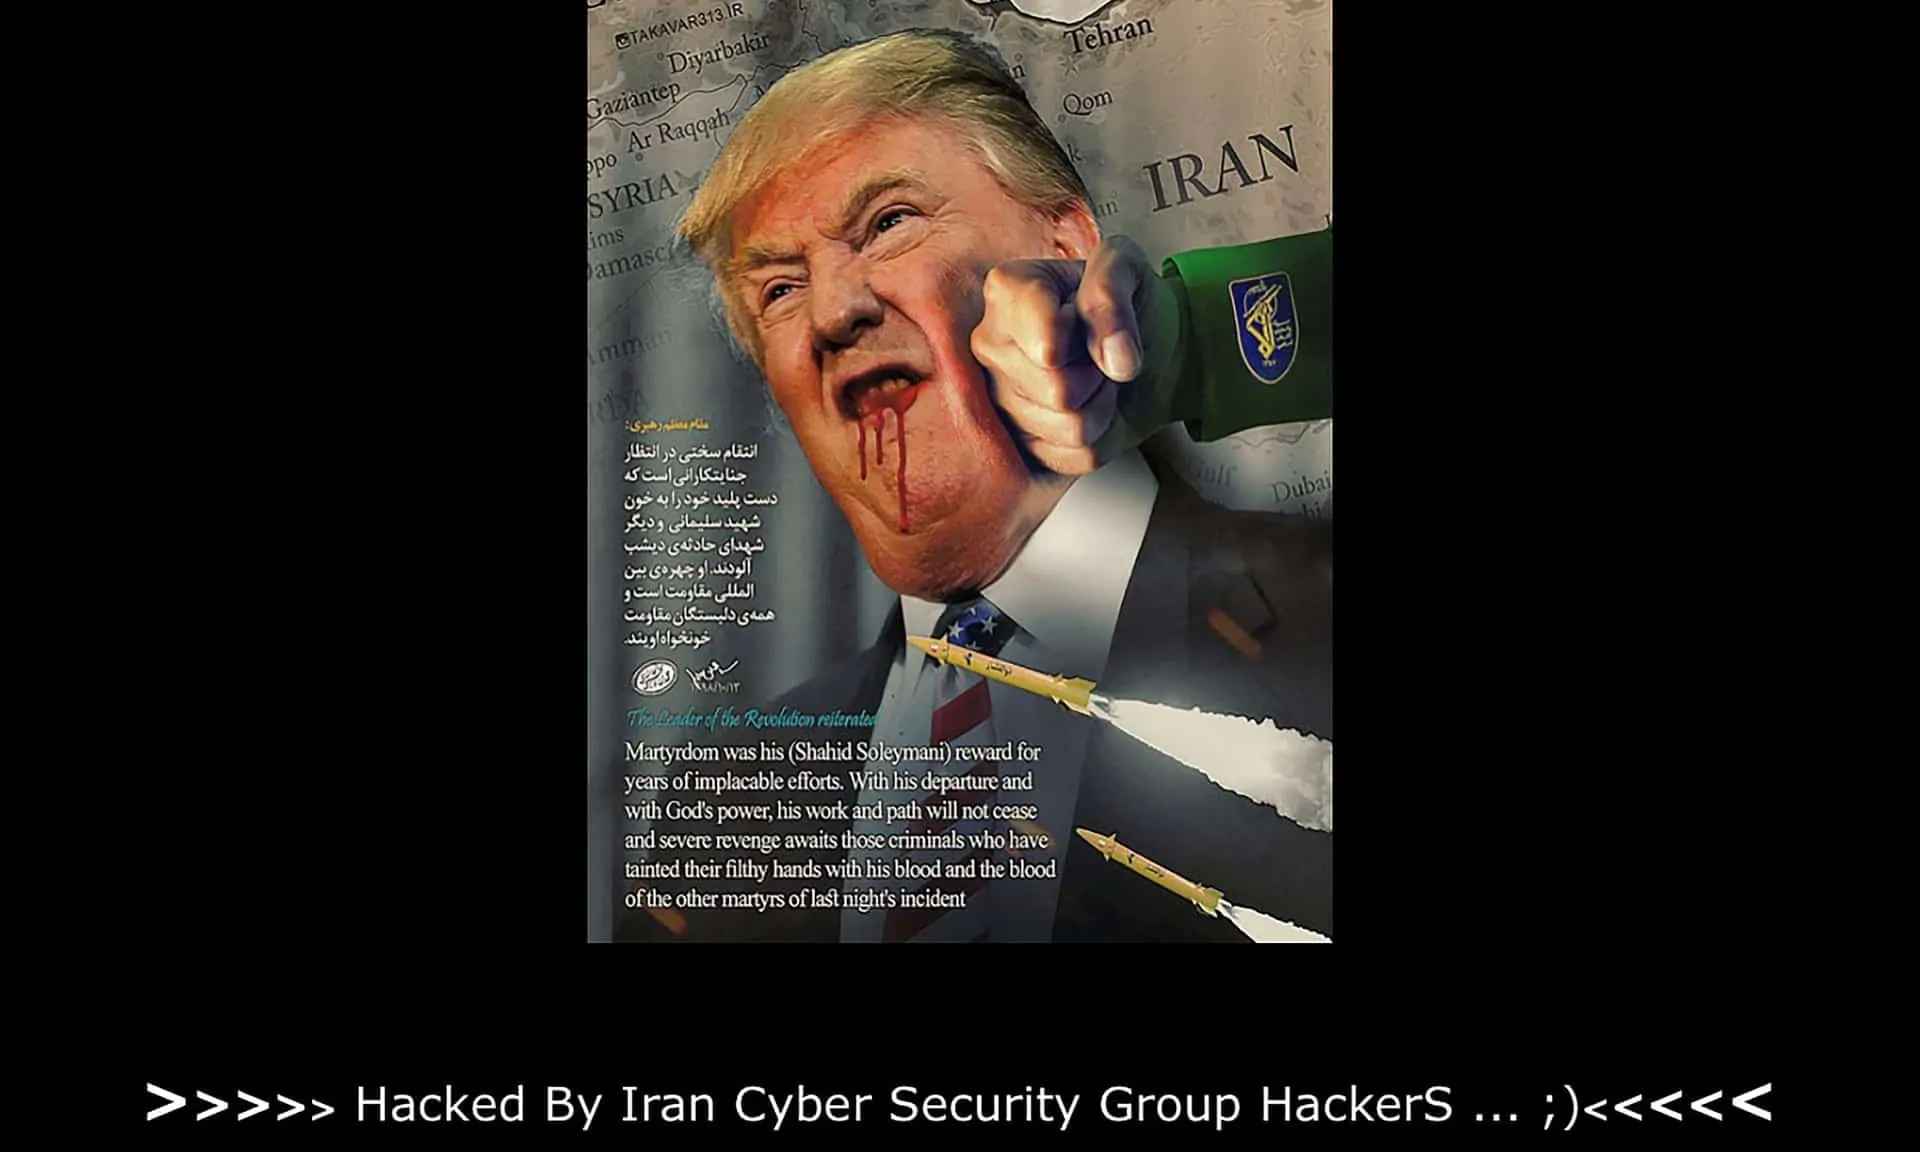 Hacked by Iran CyberSecurity Group Hackers